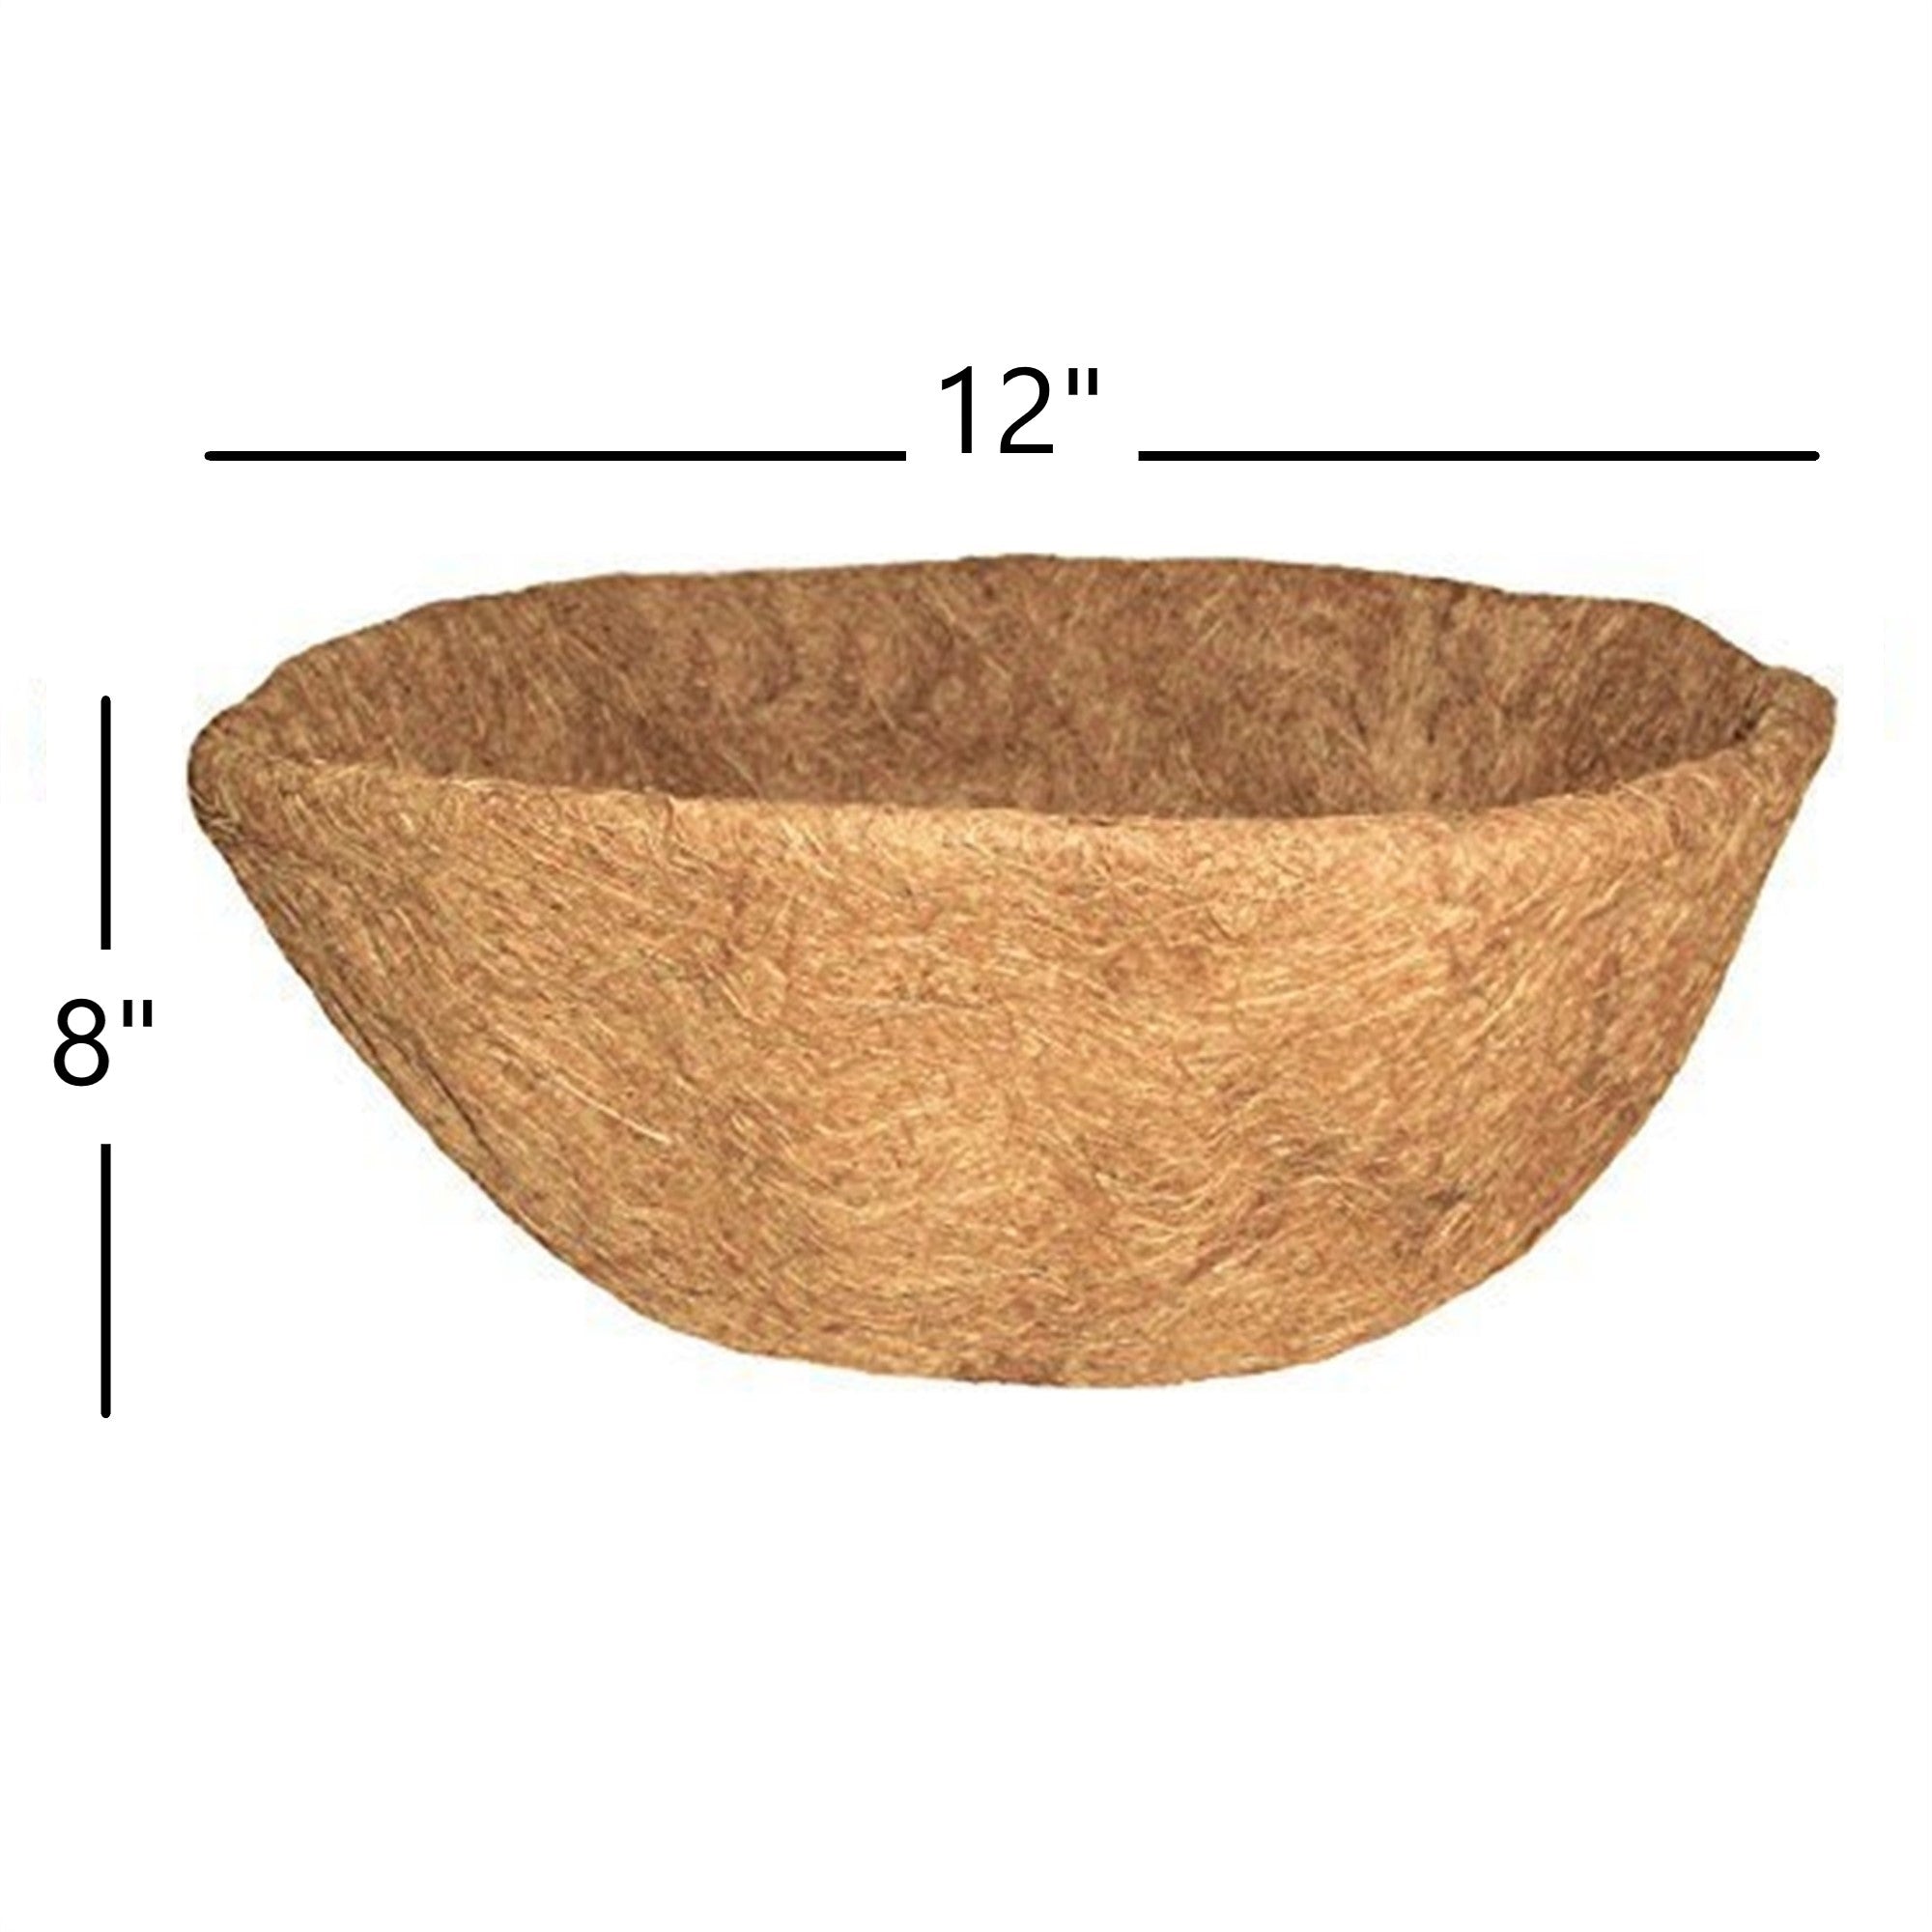 Gardener Select Outdoor Round Coco Liner For Flower Pot Planters and Hanging Baskets, Brown, 12" (Pack of 1)